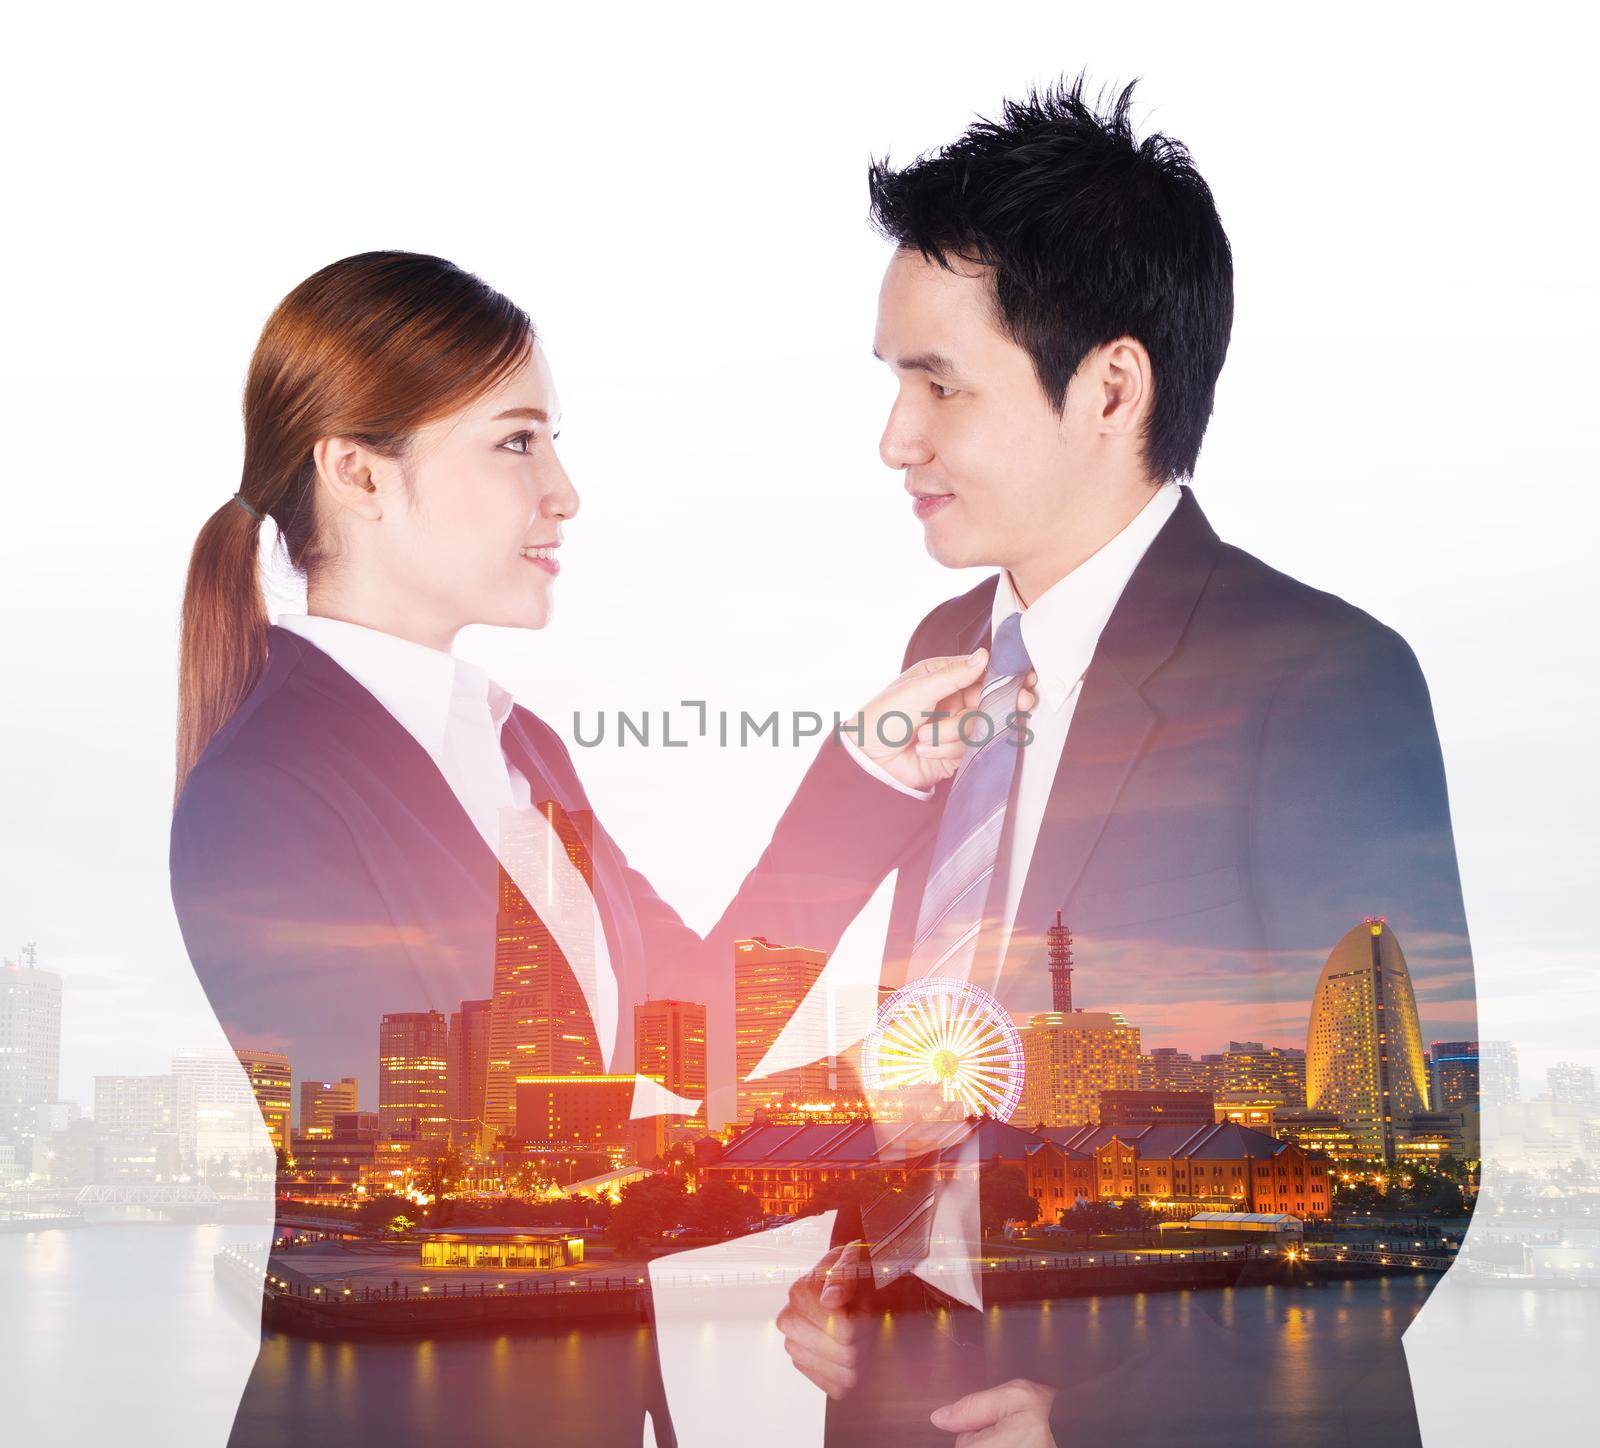 double exposure of business woman's hands adjusting neck tie of man in suit with city background by geargodz